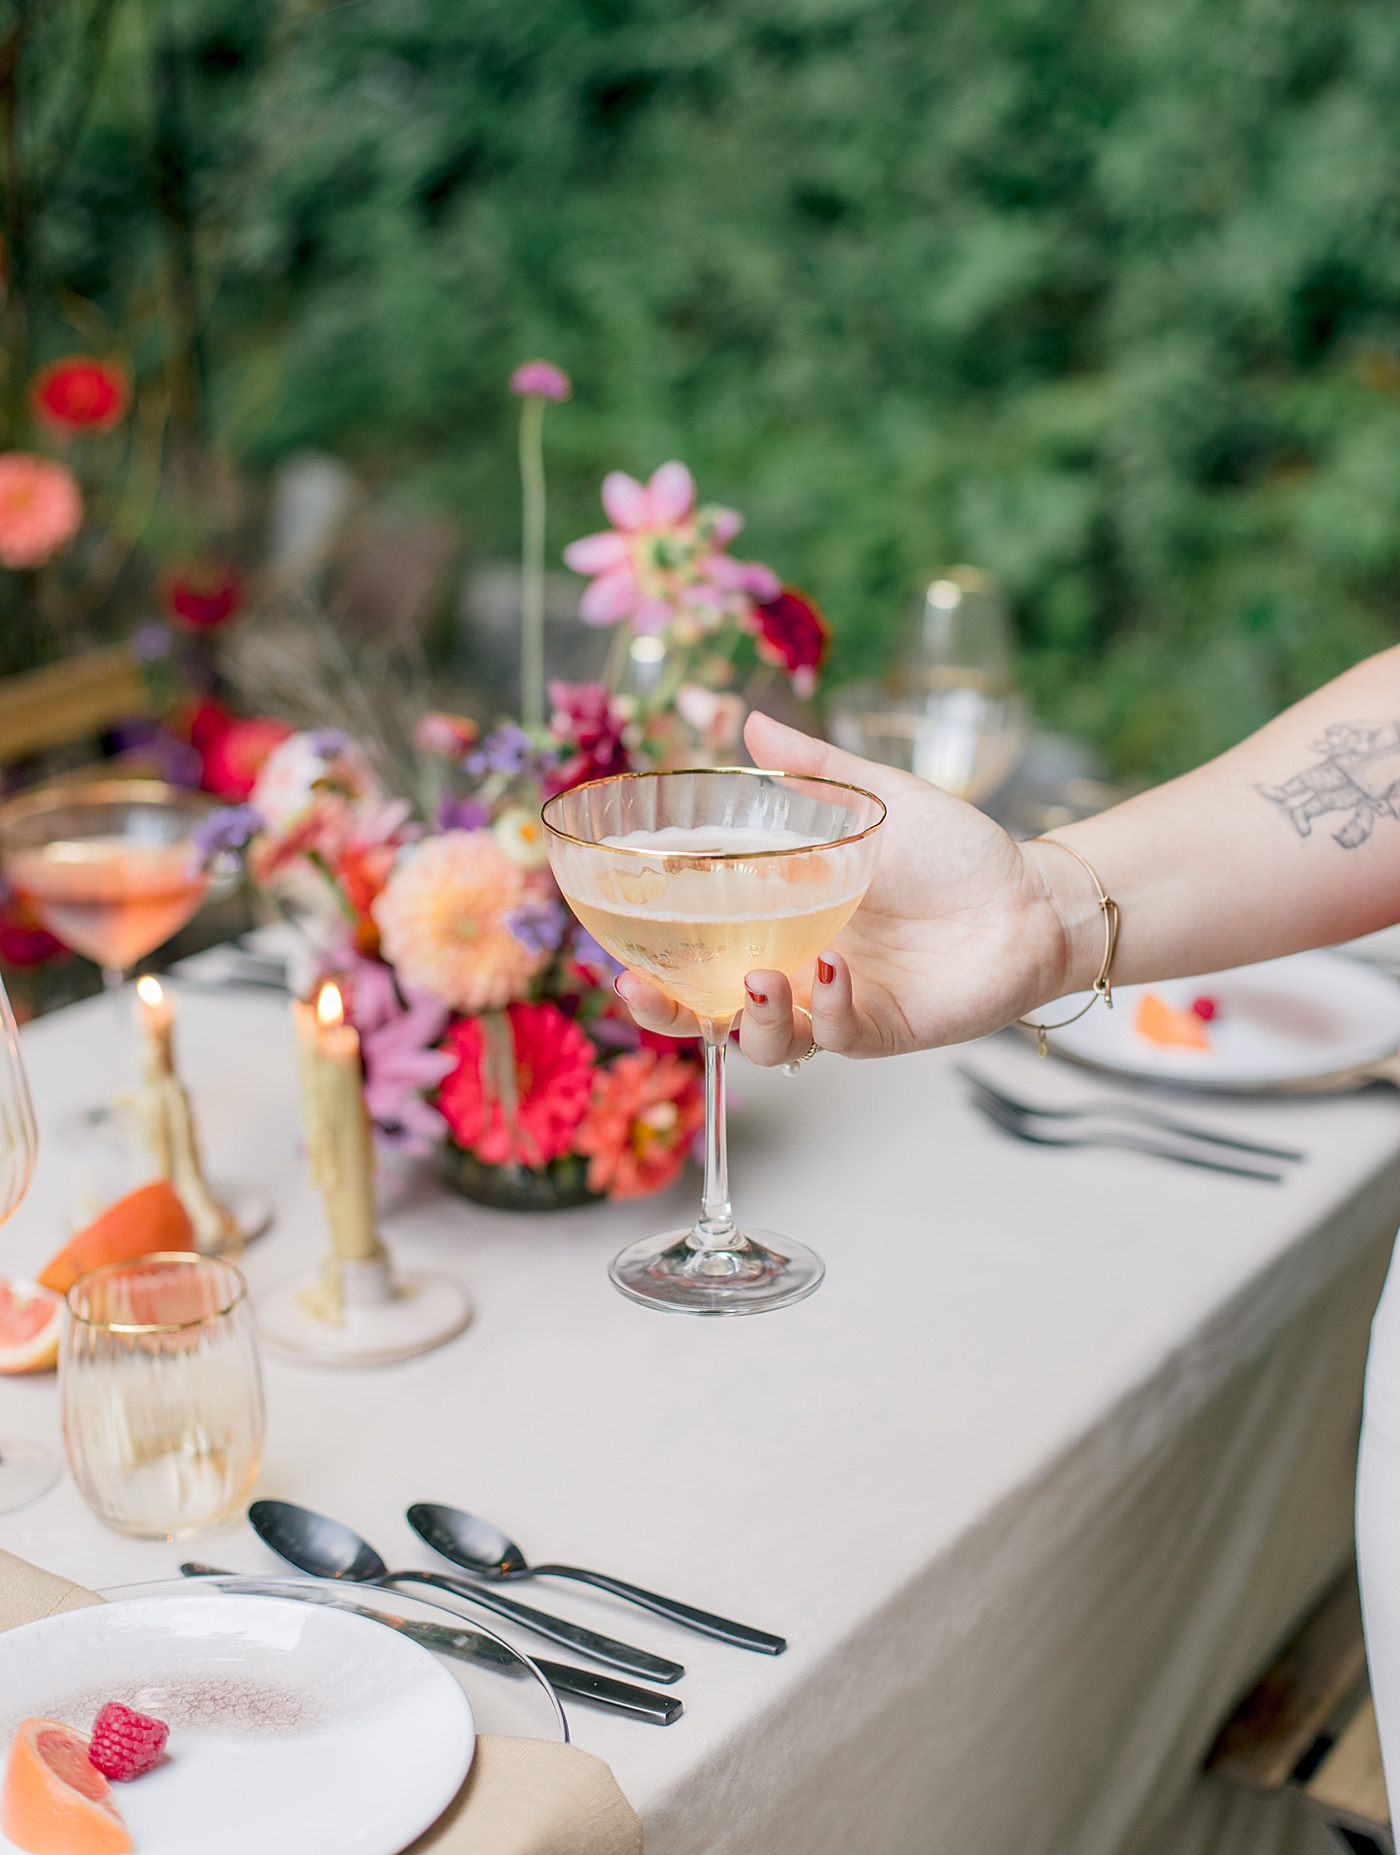 Bride holding champagne flute during Adirondack Mountain Elopement Weekend | Image by Hope Helmuth Photography